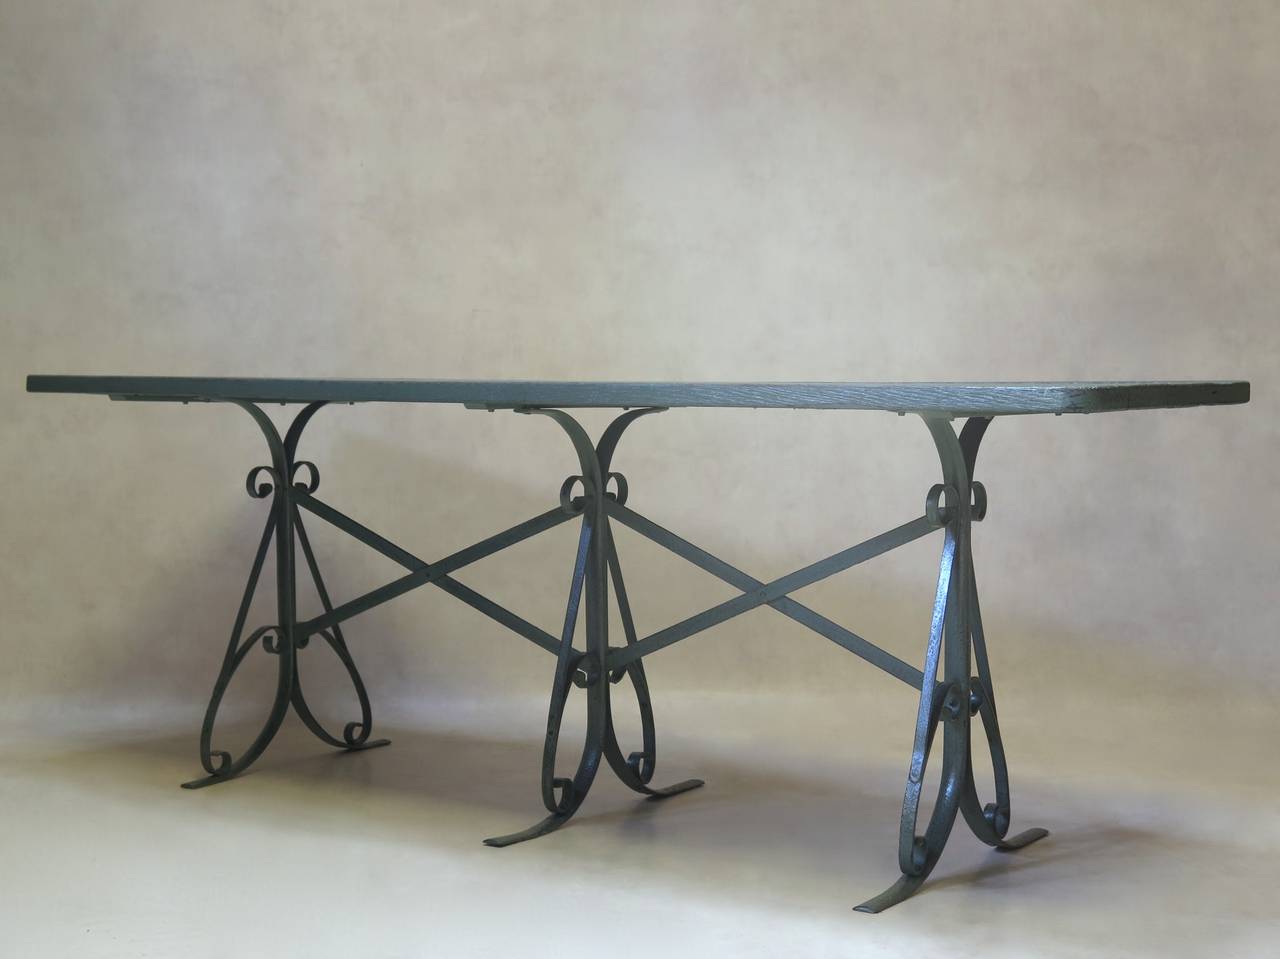 Dining table with a wrought-iron base and wood top, painted in soft grey-green. The three scrolling iron legs are joined together by X-shape stretchers. Can be used indoors or out.